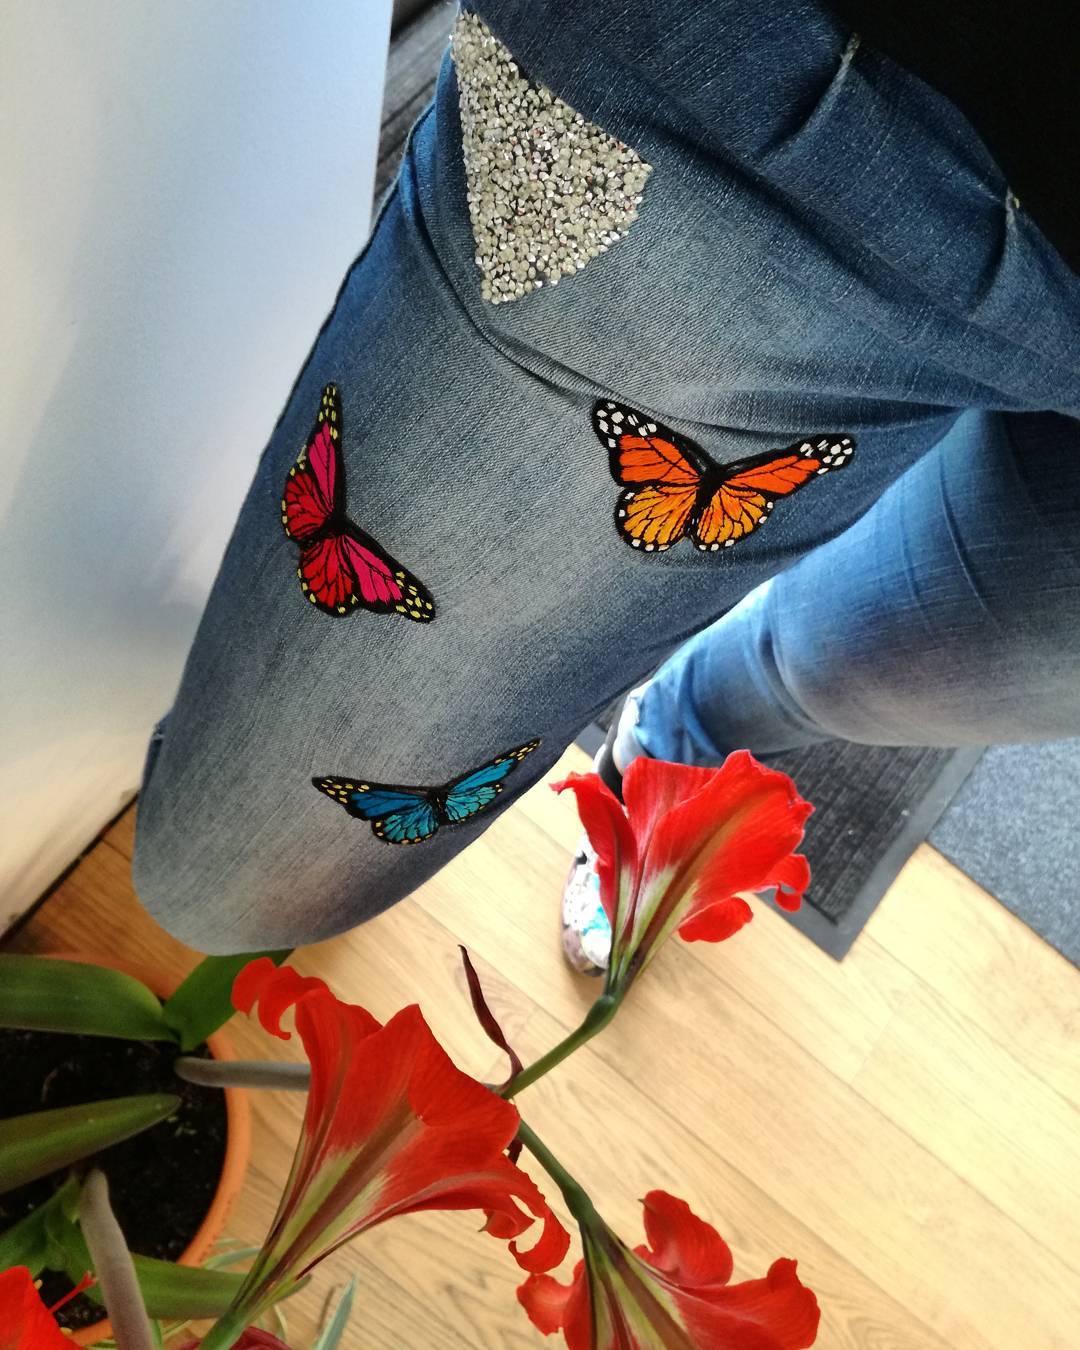 Butterfly Flying On Jeans